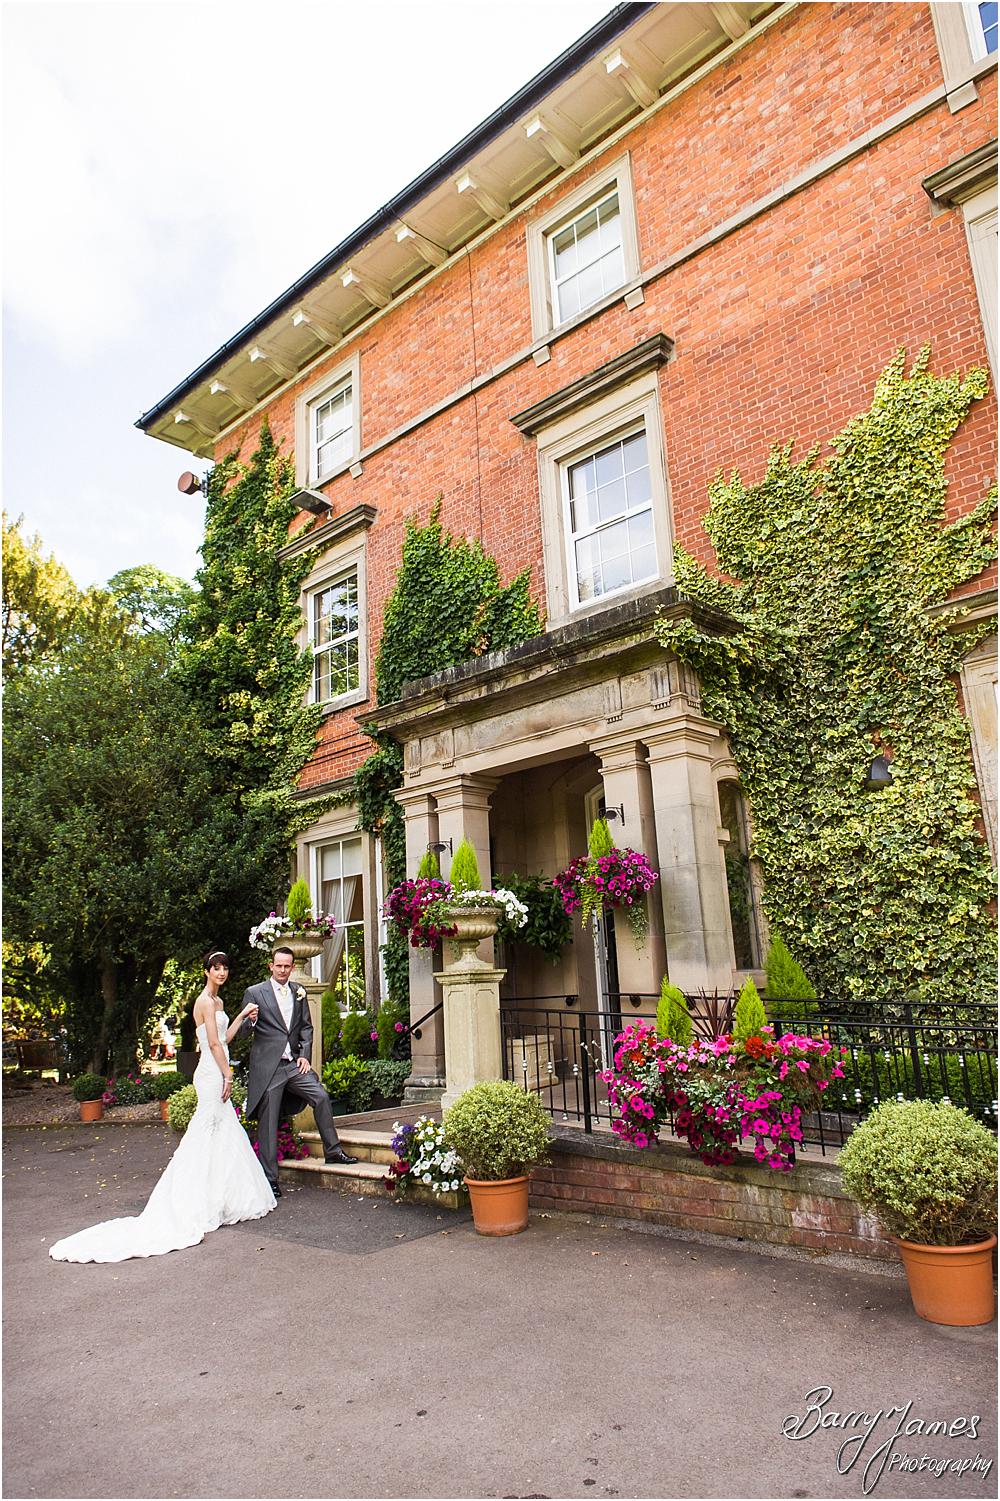 Creative evening portraits of the Bride and Groom at Rodbaston Hall in Penkridge by Walsall Wedding Photographer Barry James